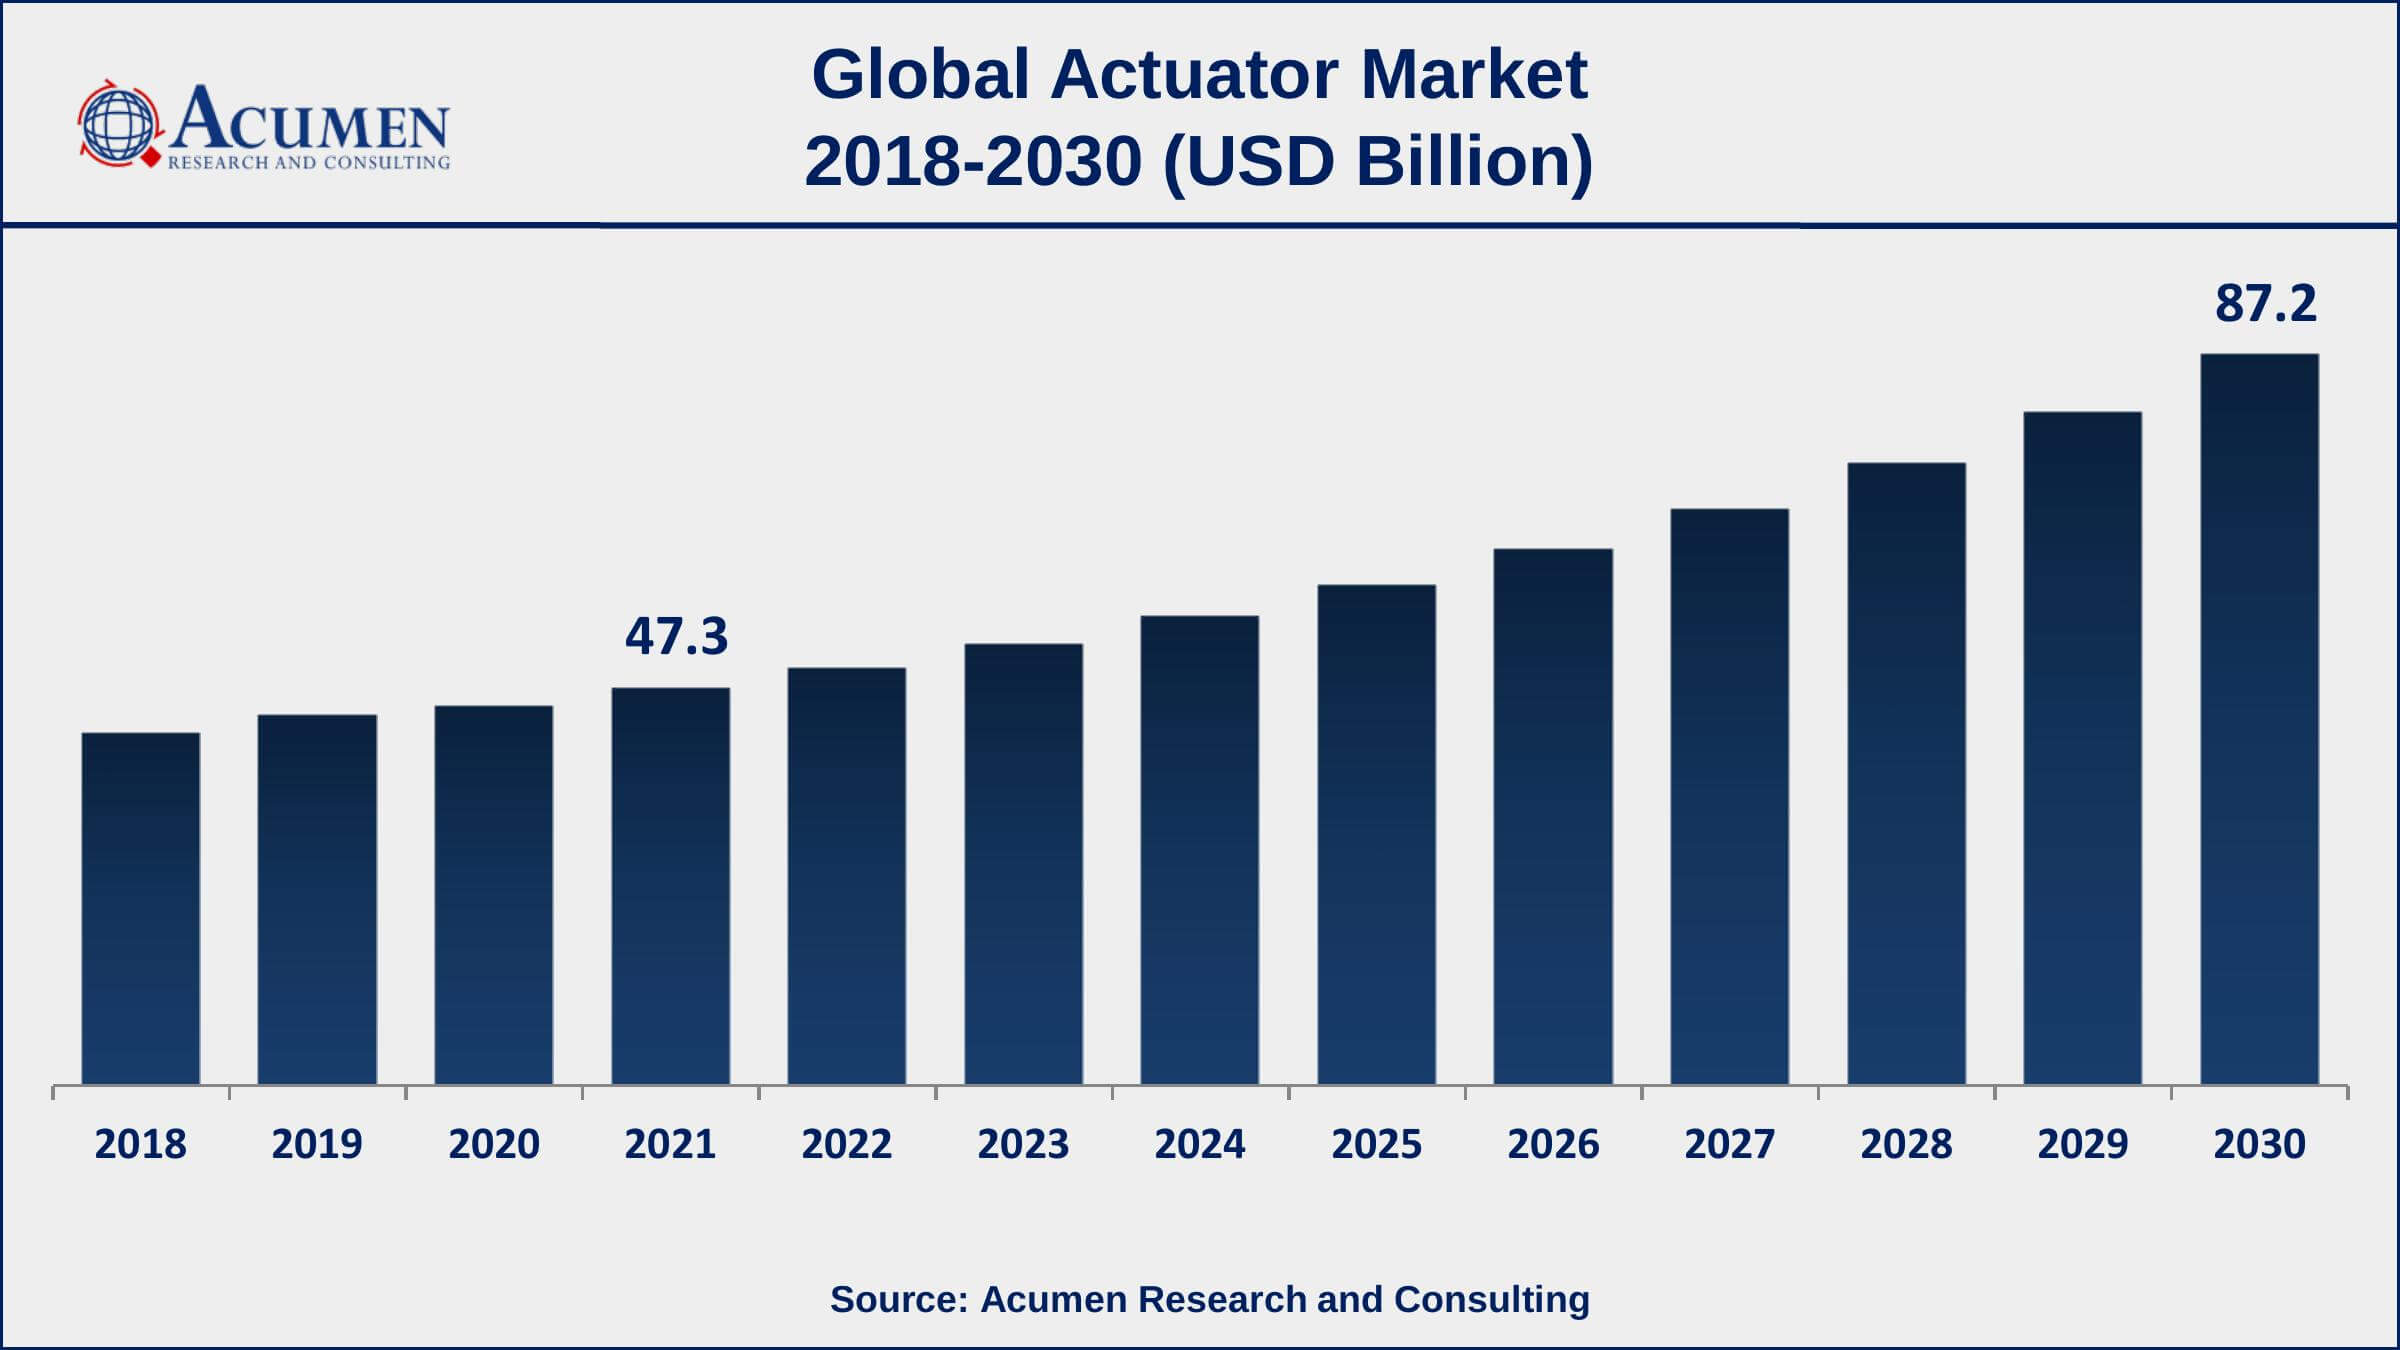 Europe actuator market growth will observe strongest CAGR from 2022 to 2030